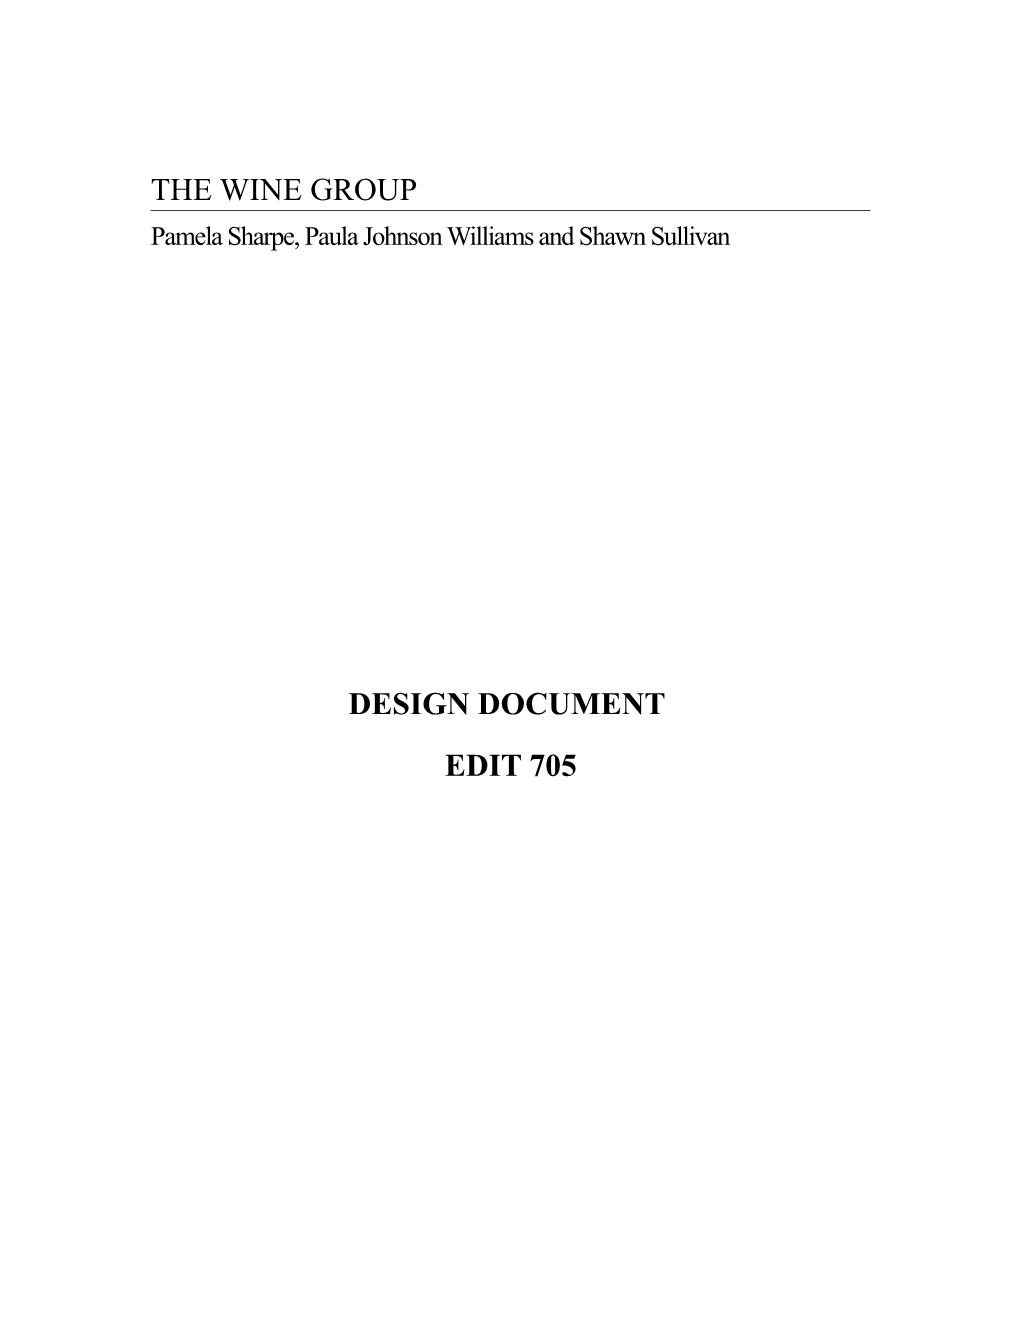 Design Document: the Wine Group